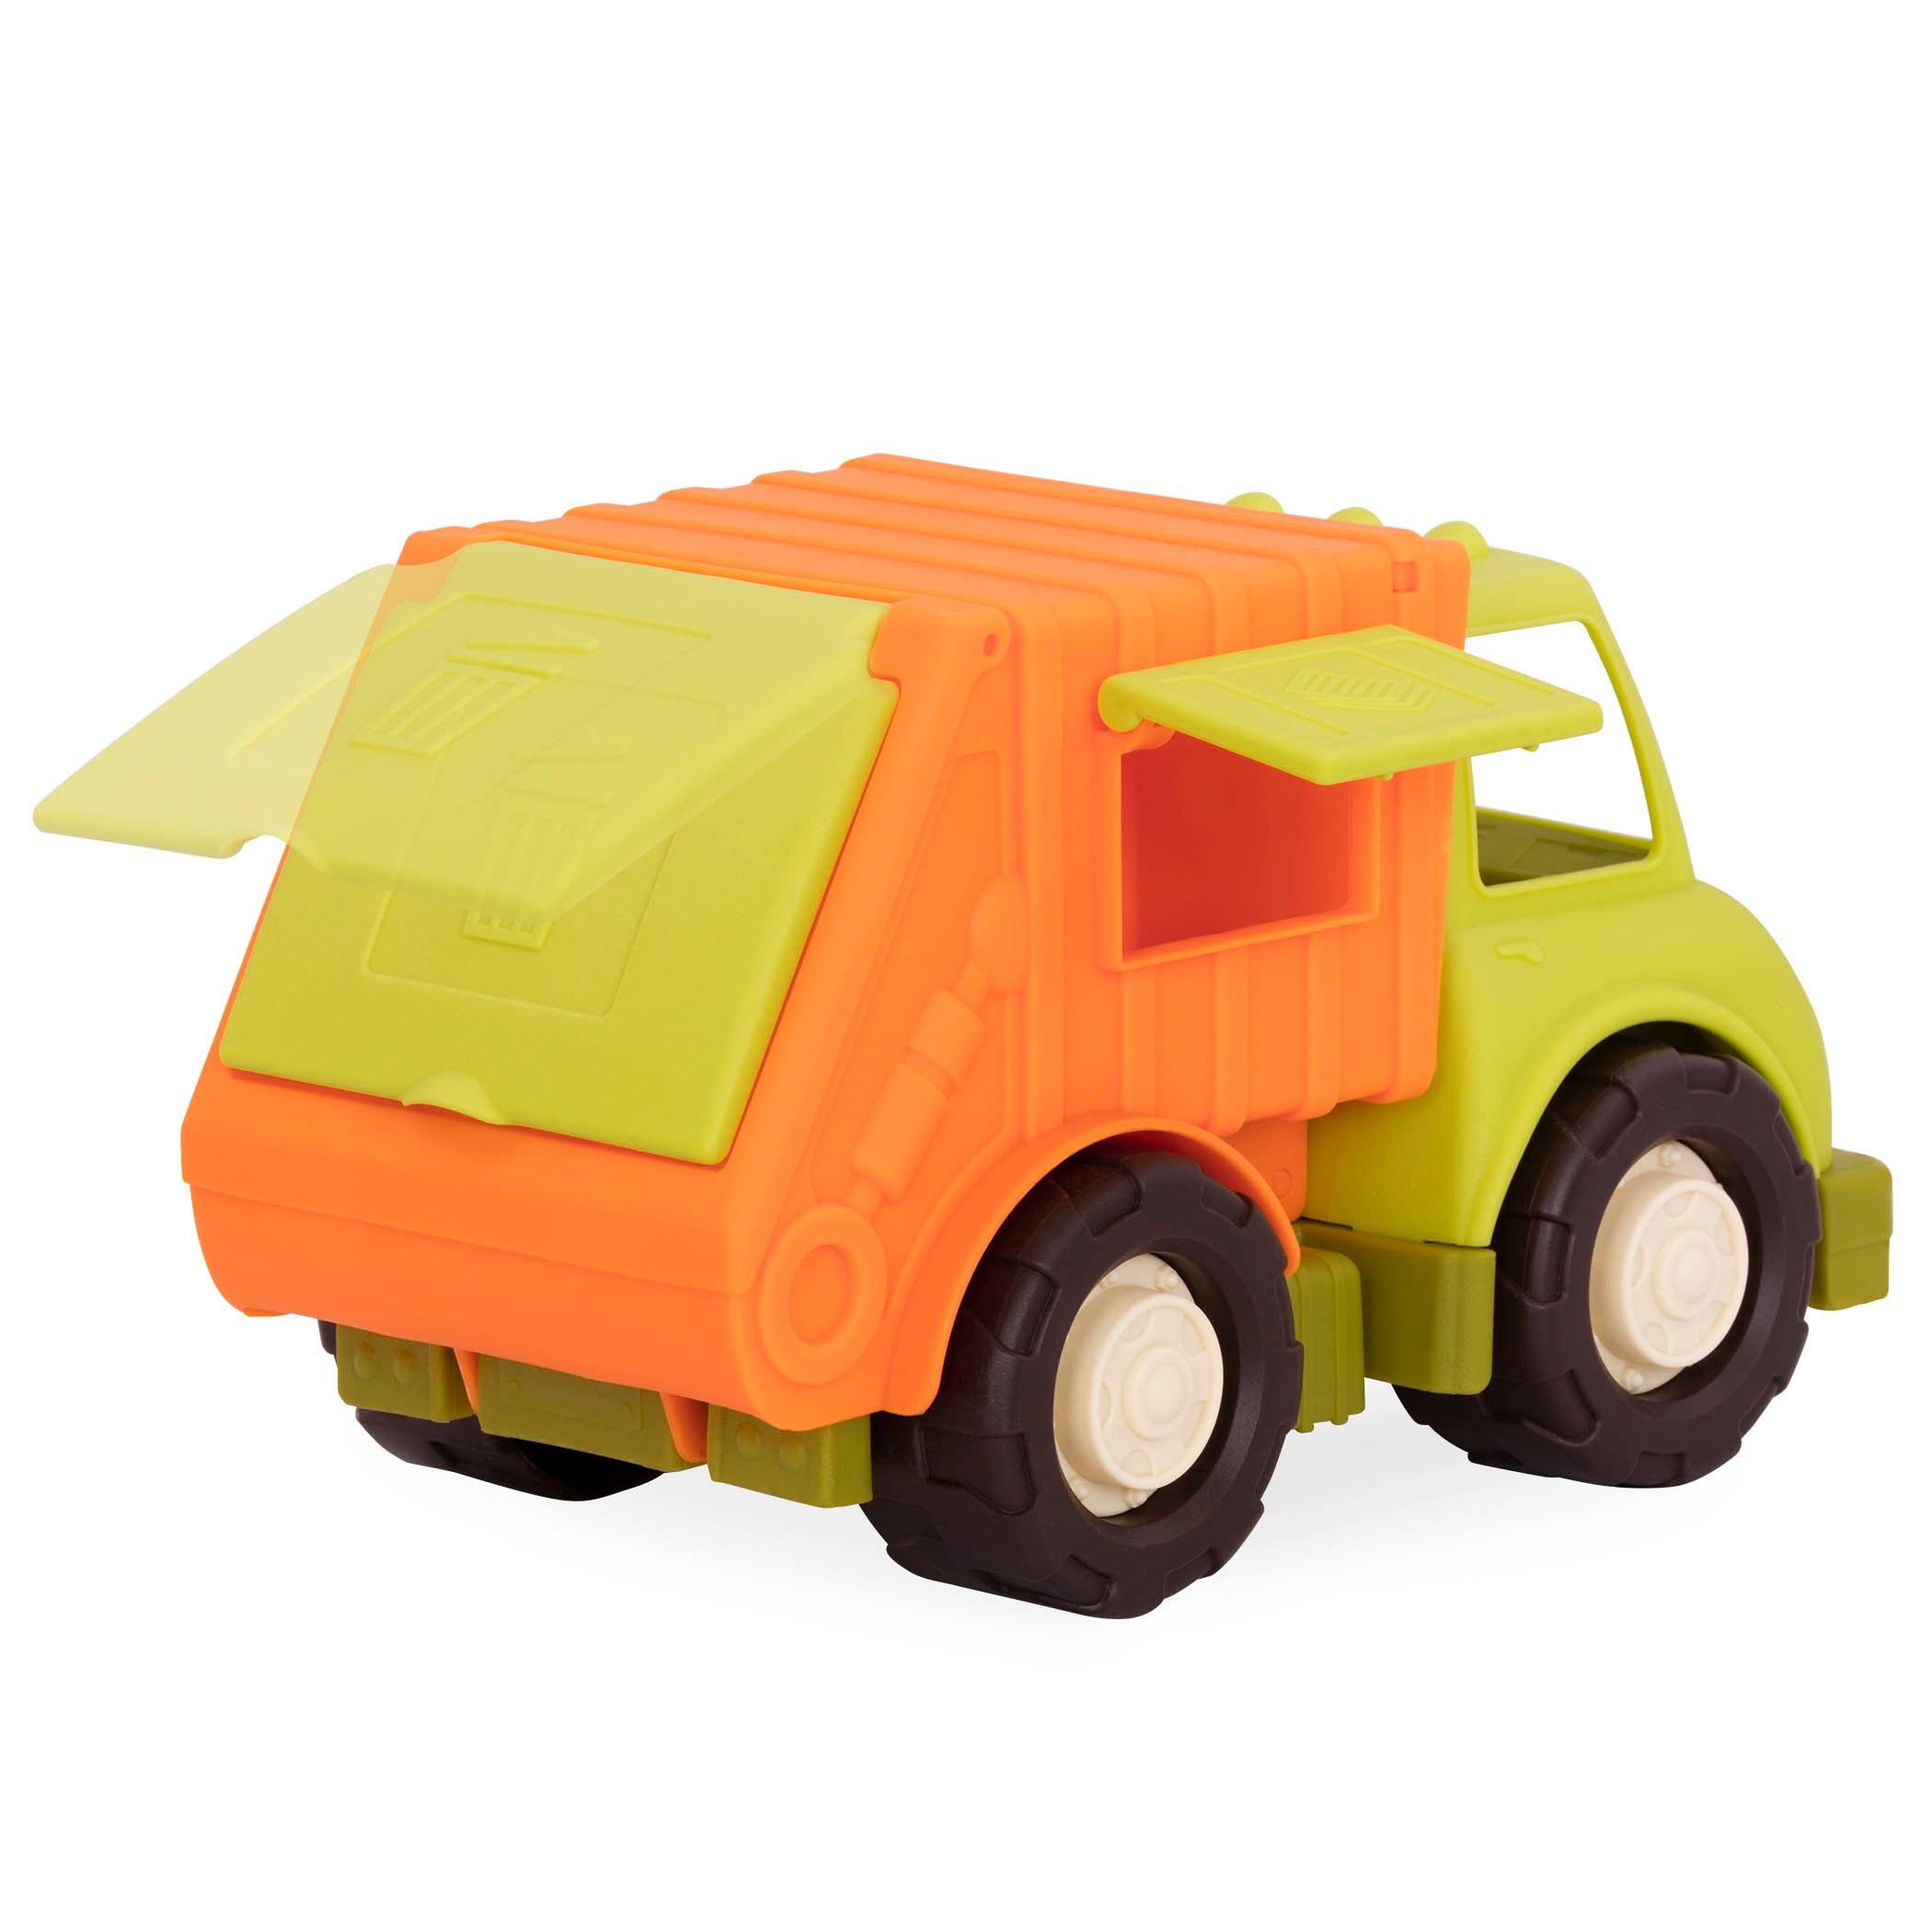 Toy recycling truck.